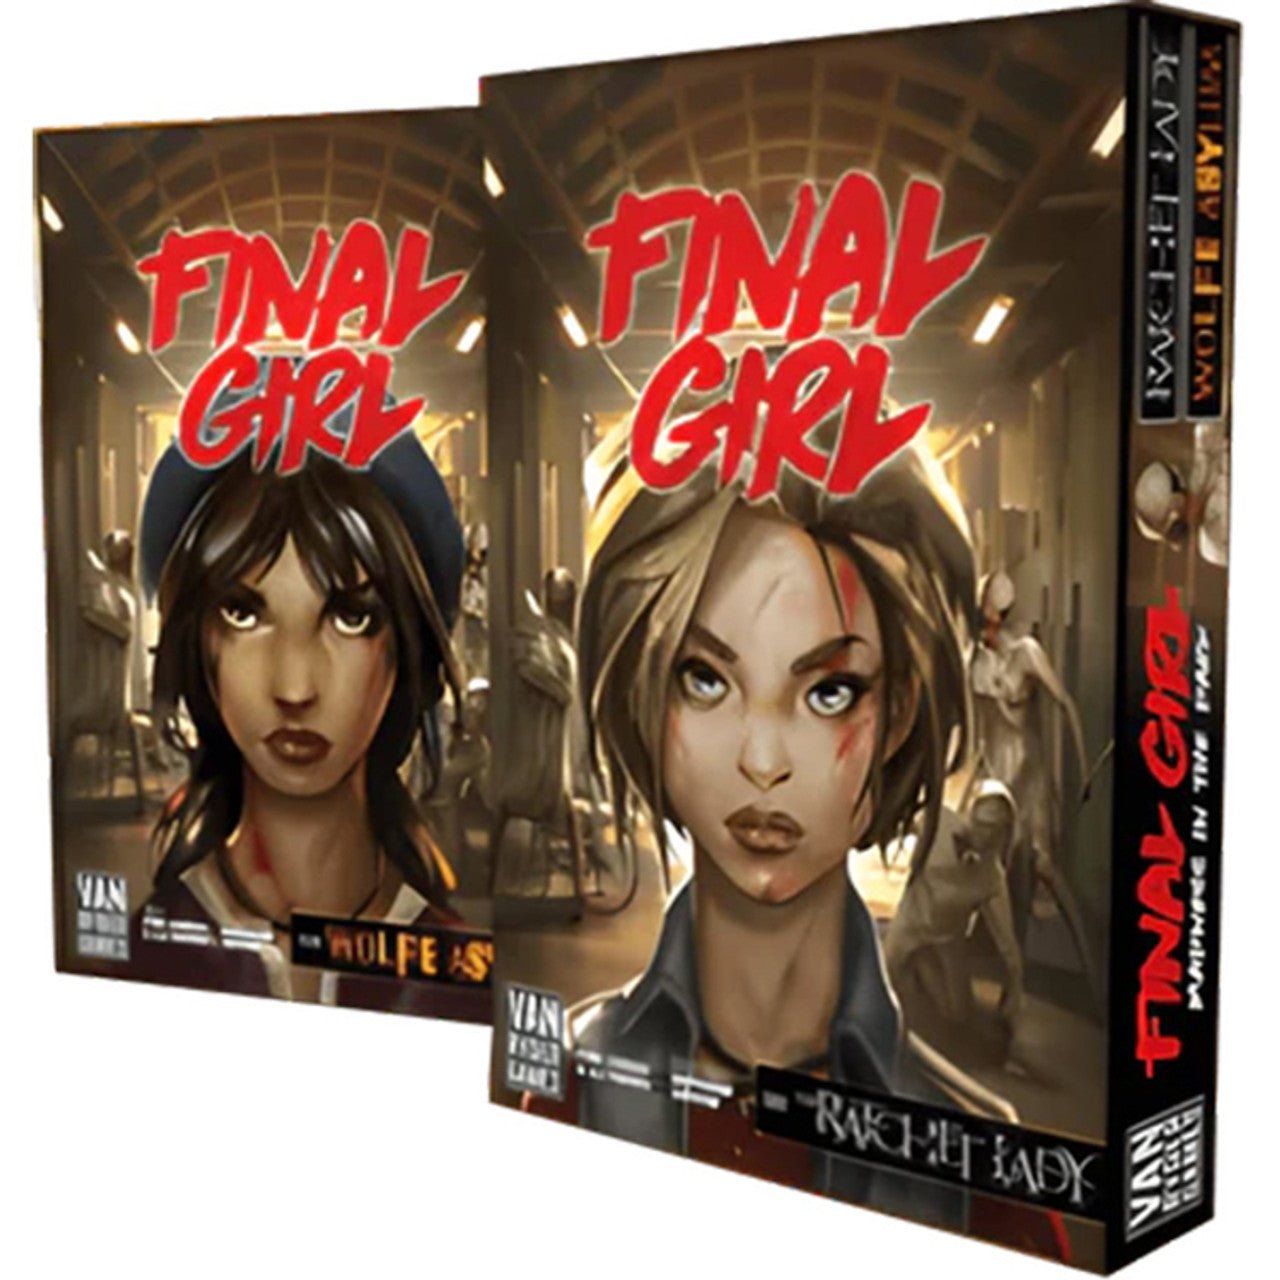 Final Girl: Series 2 - Madness in the Dark Feature Film Expansion in Board Games at The Compleat Strategist